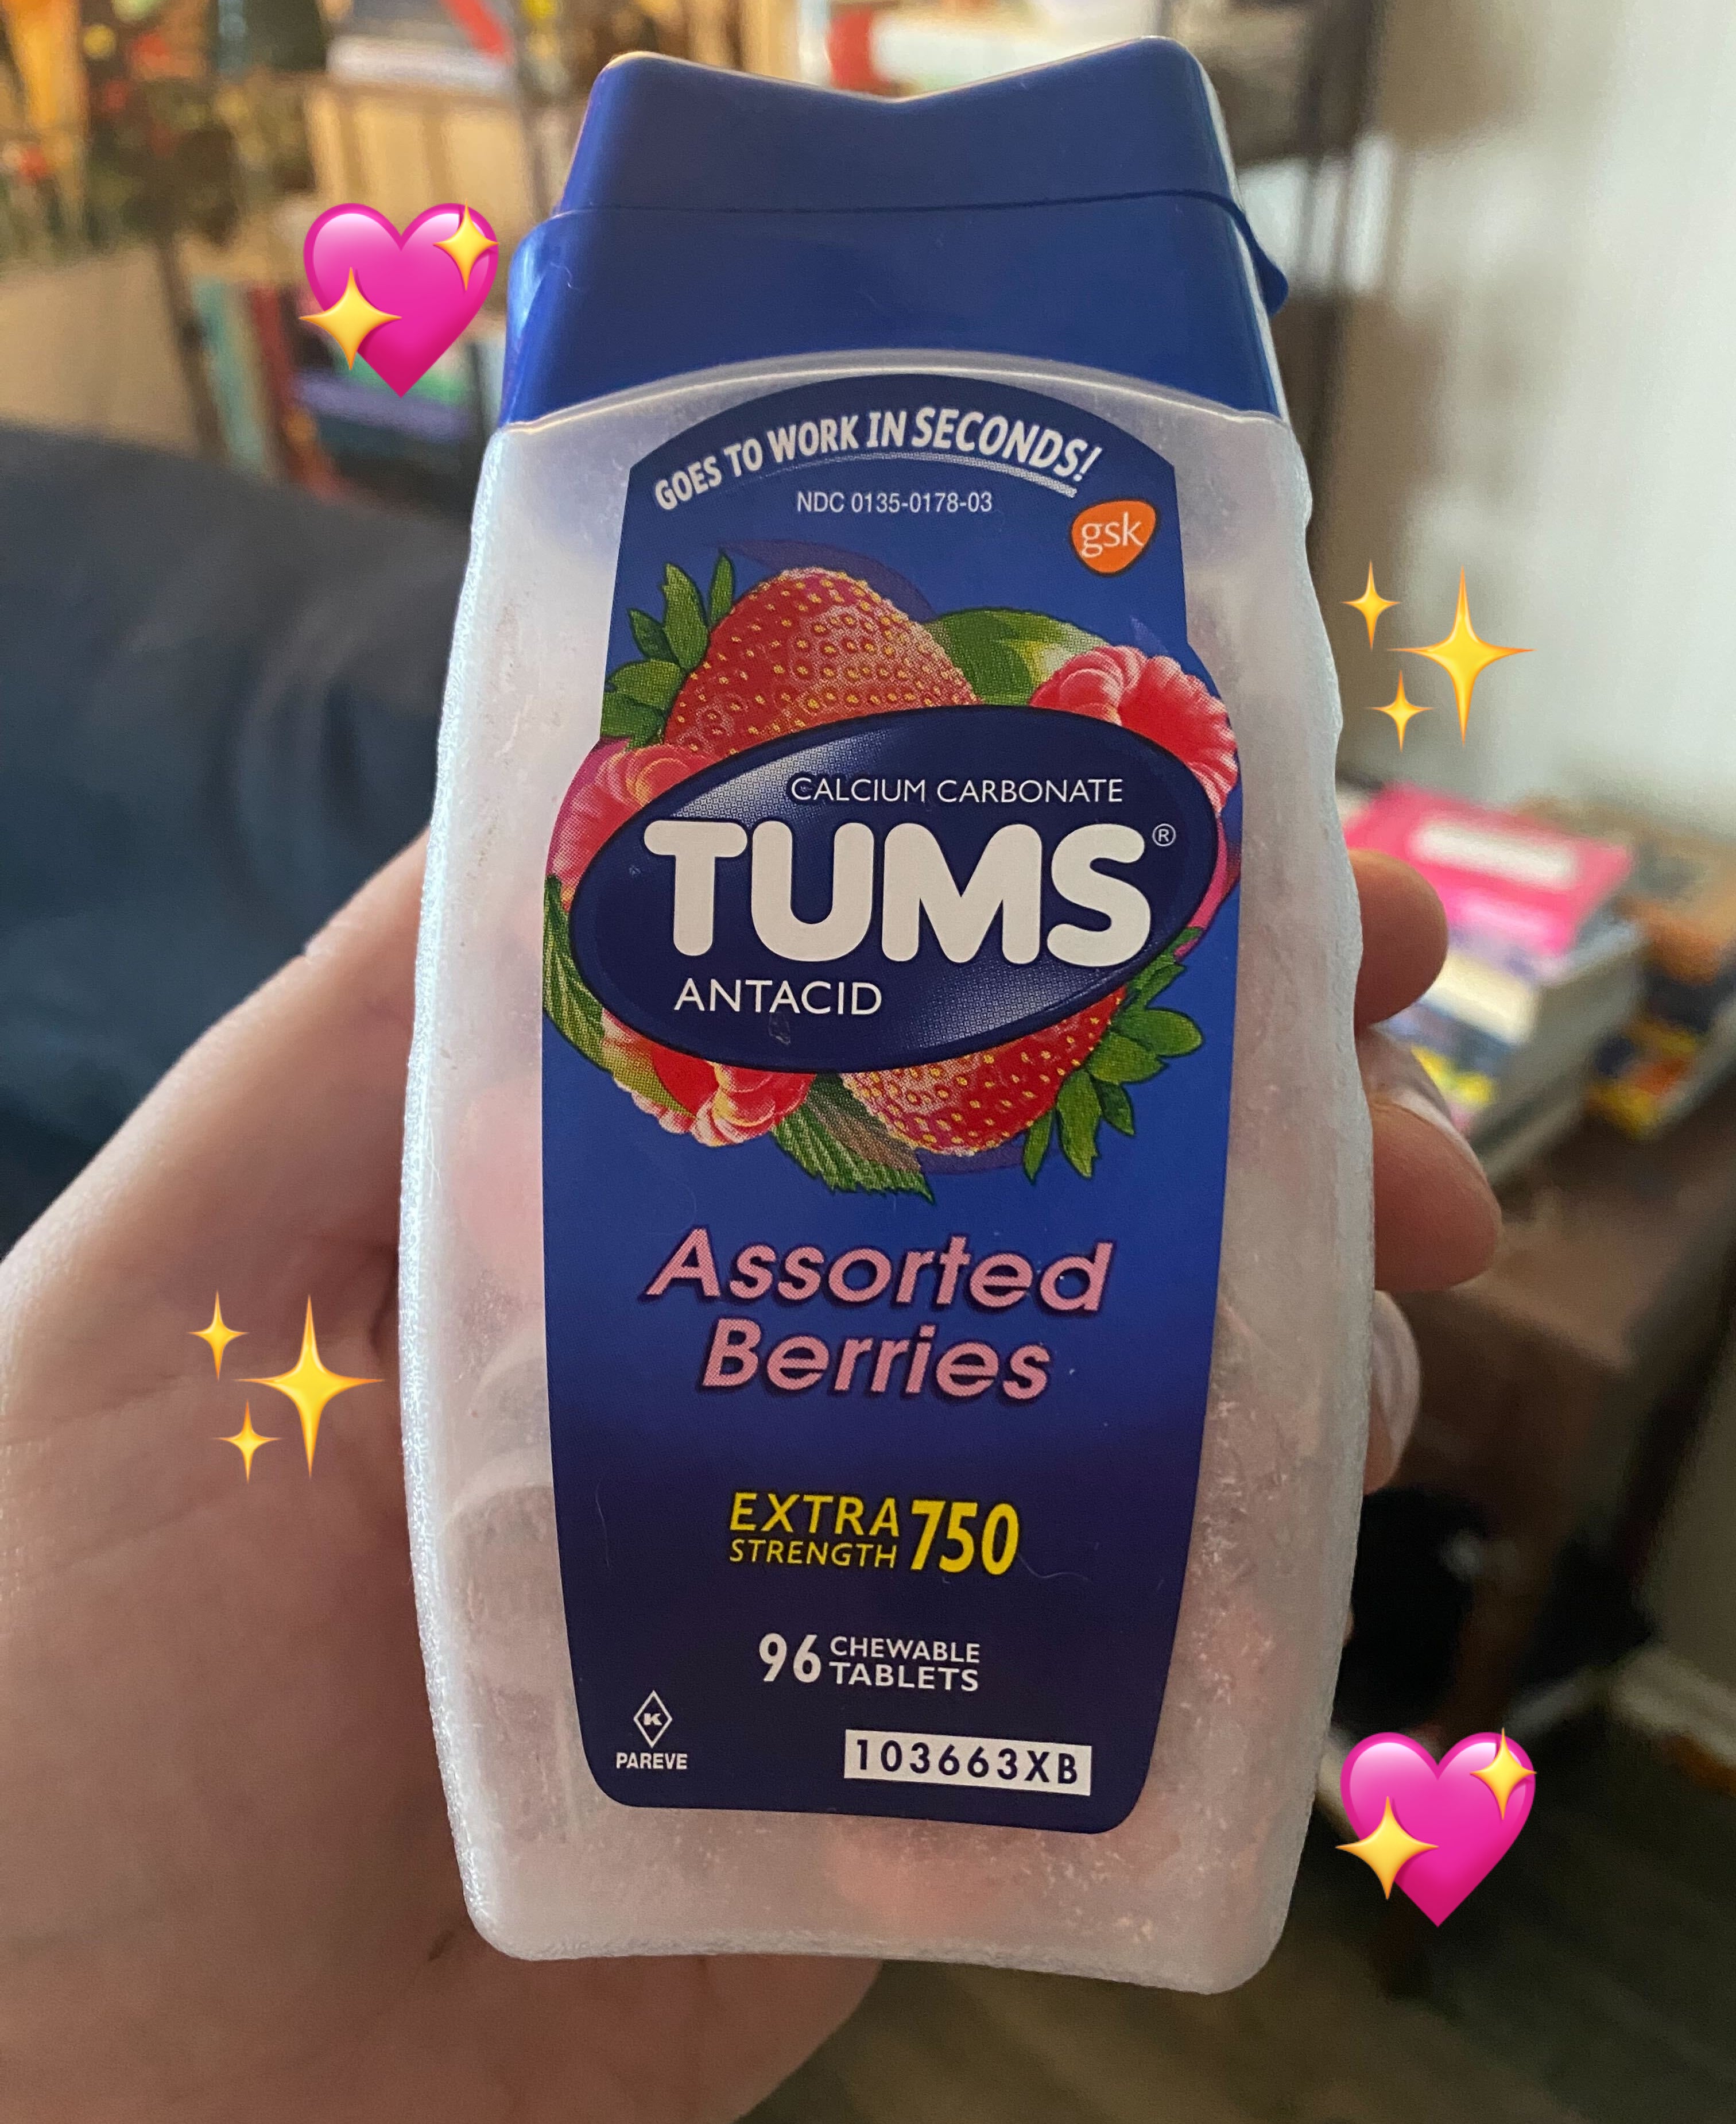 Hand holding a bottle of Tums Assorted Berries antacid tablets